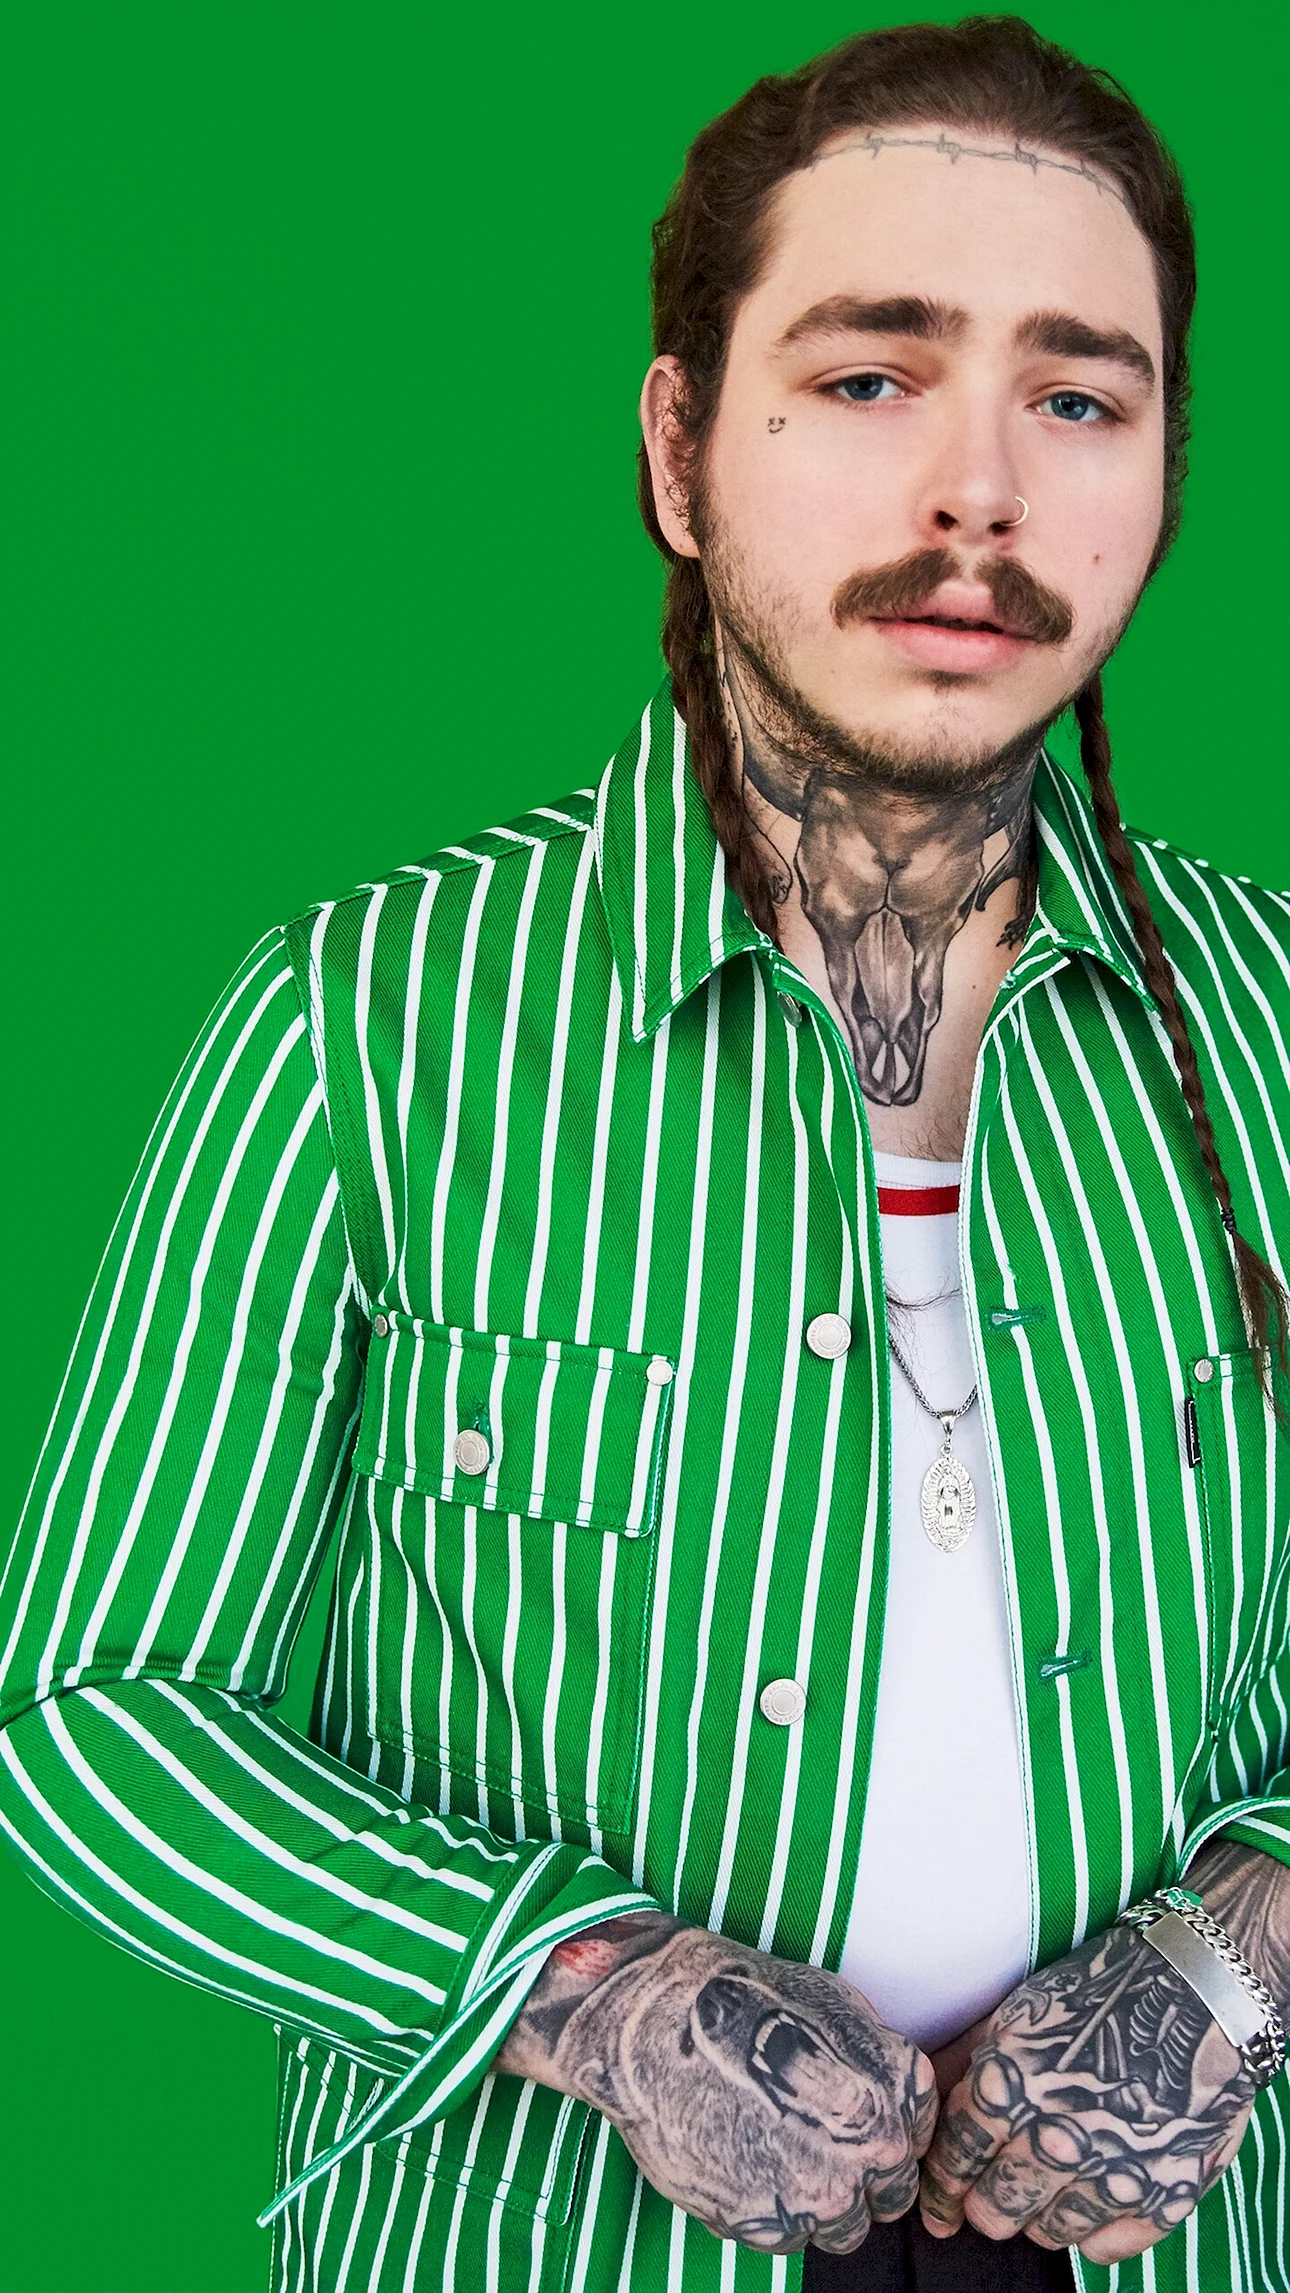 Post Malone Gq Wallpaper For iPhone